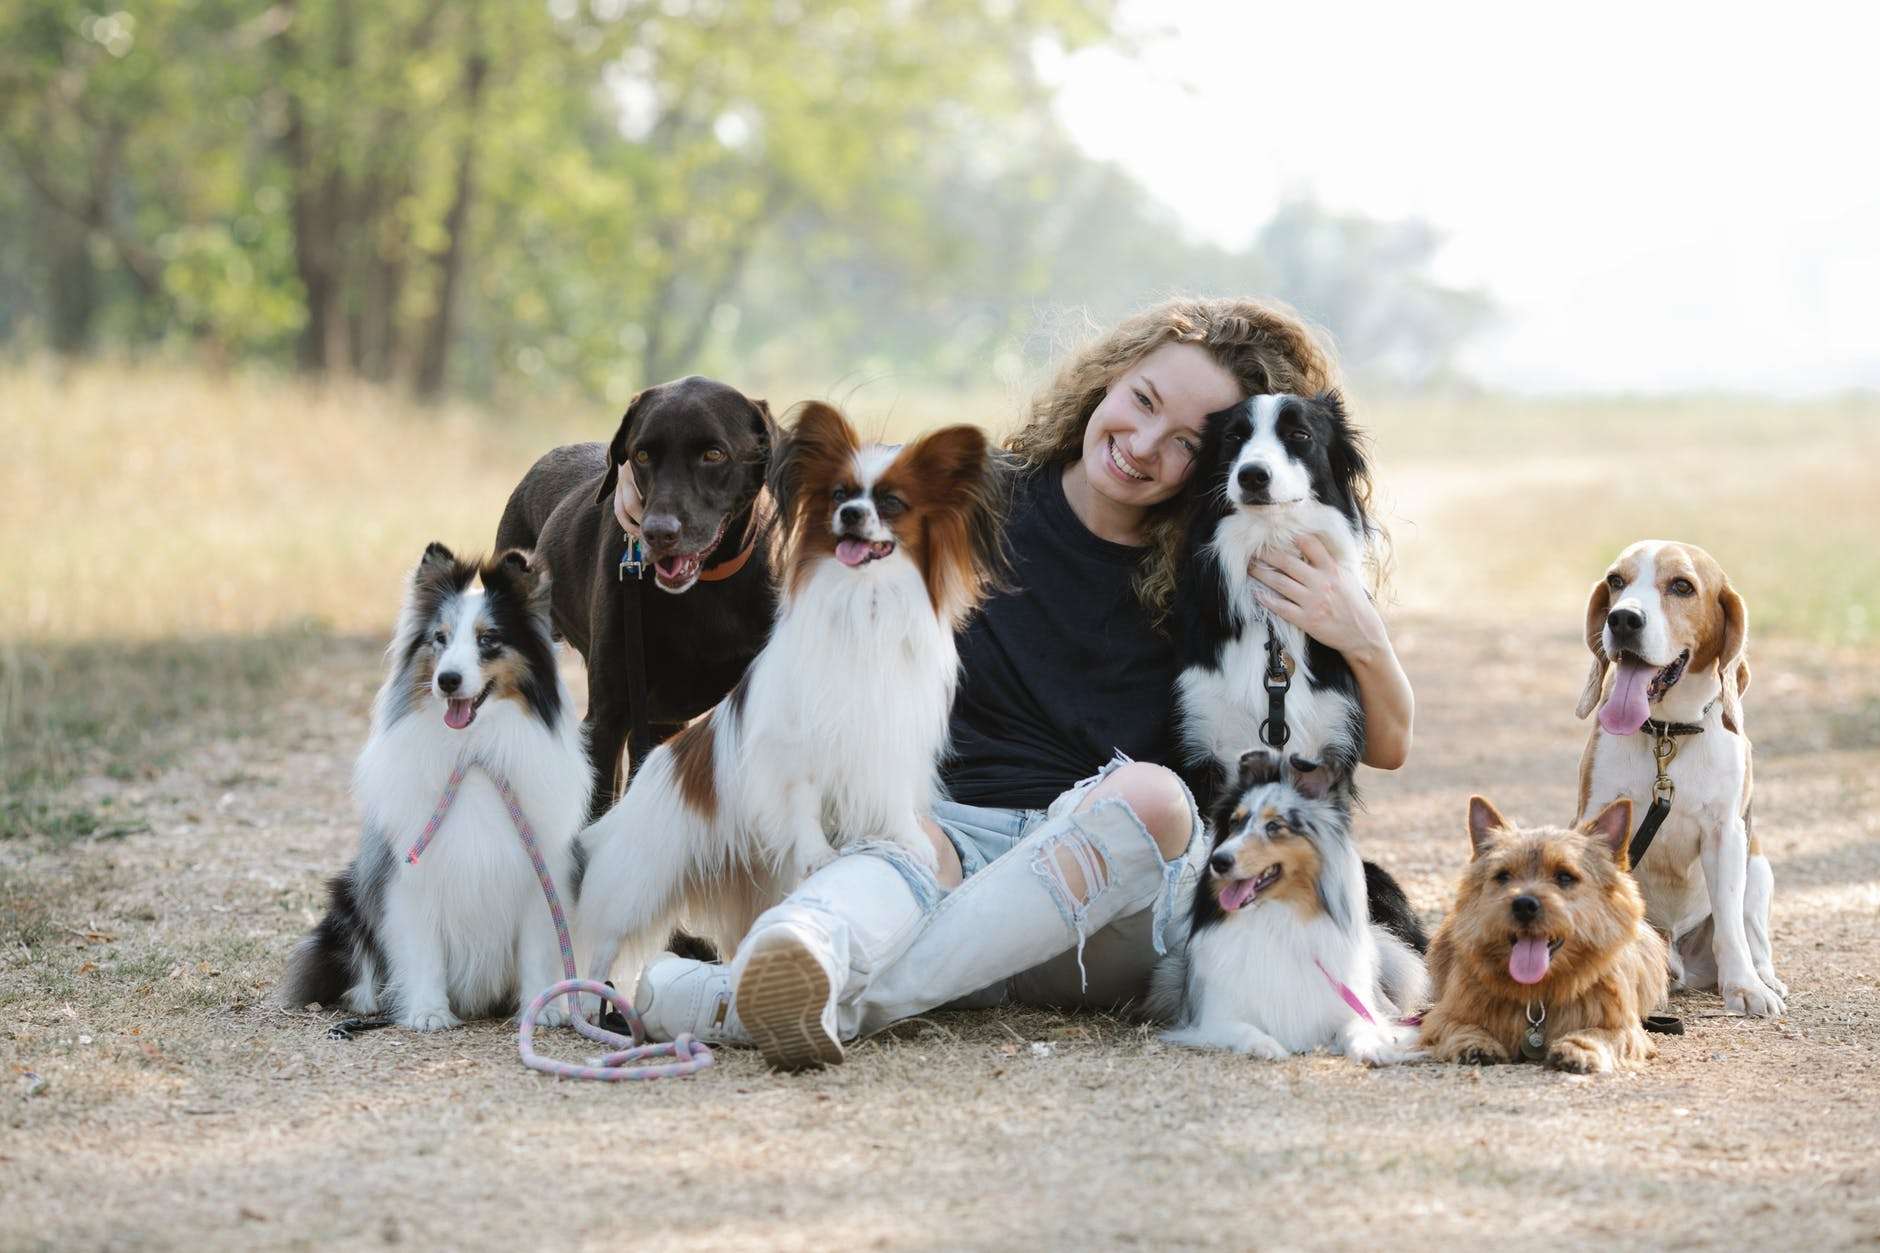 gentle smiling woman embracing purebred dogs while sitting on ground: happiness in our homeschools